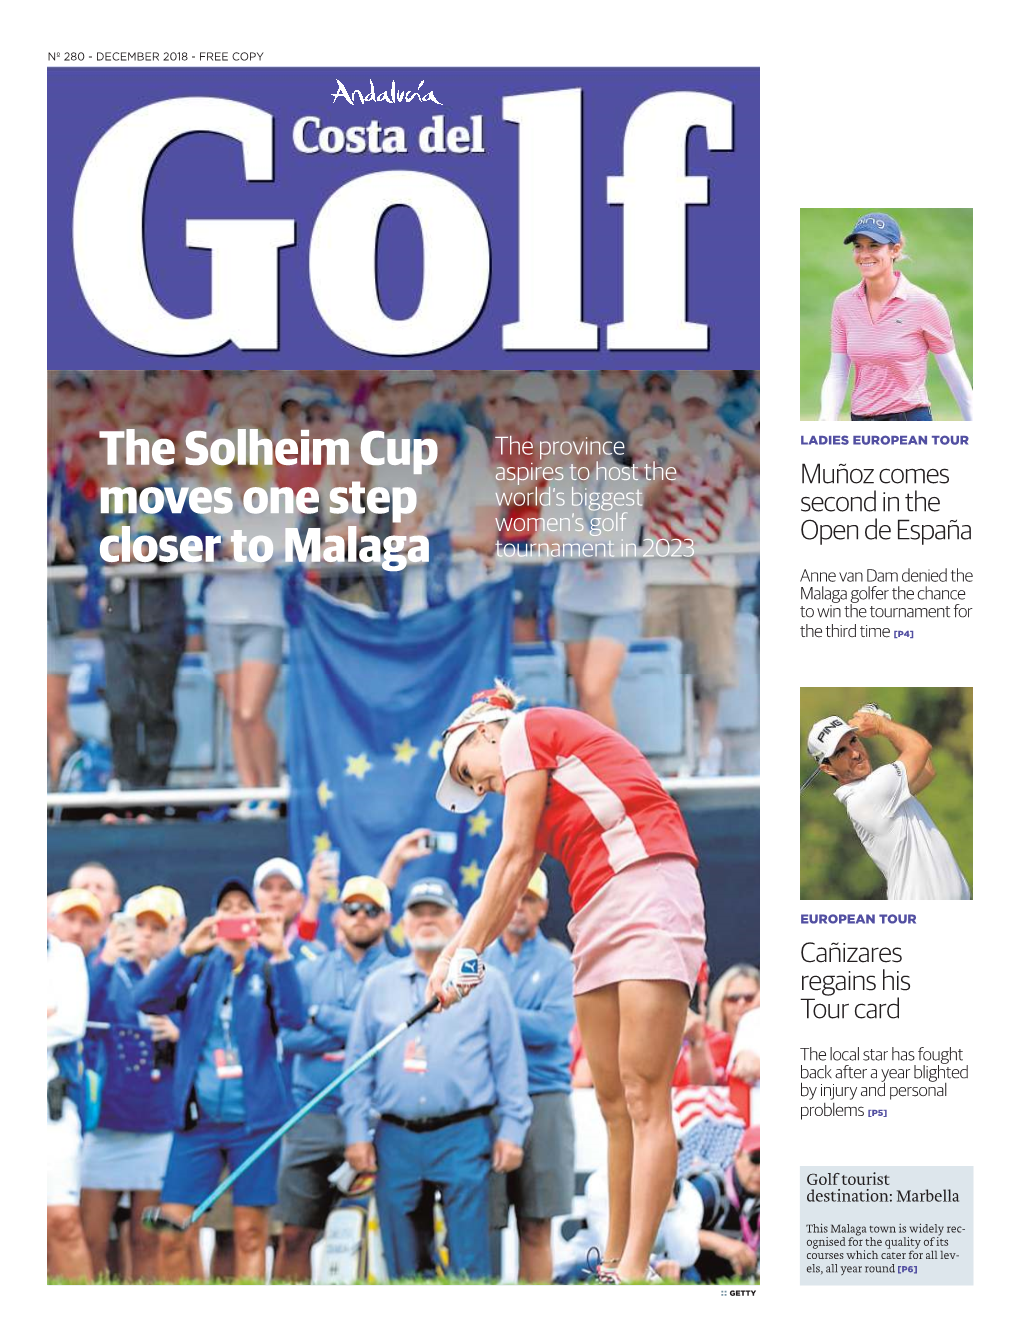 The Solheim Cup Moves One Step Closer to Malaga